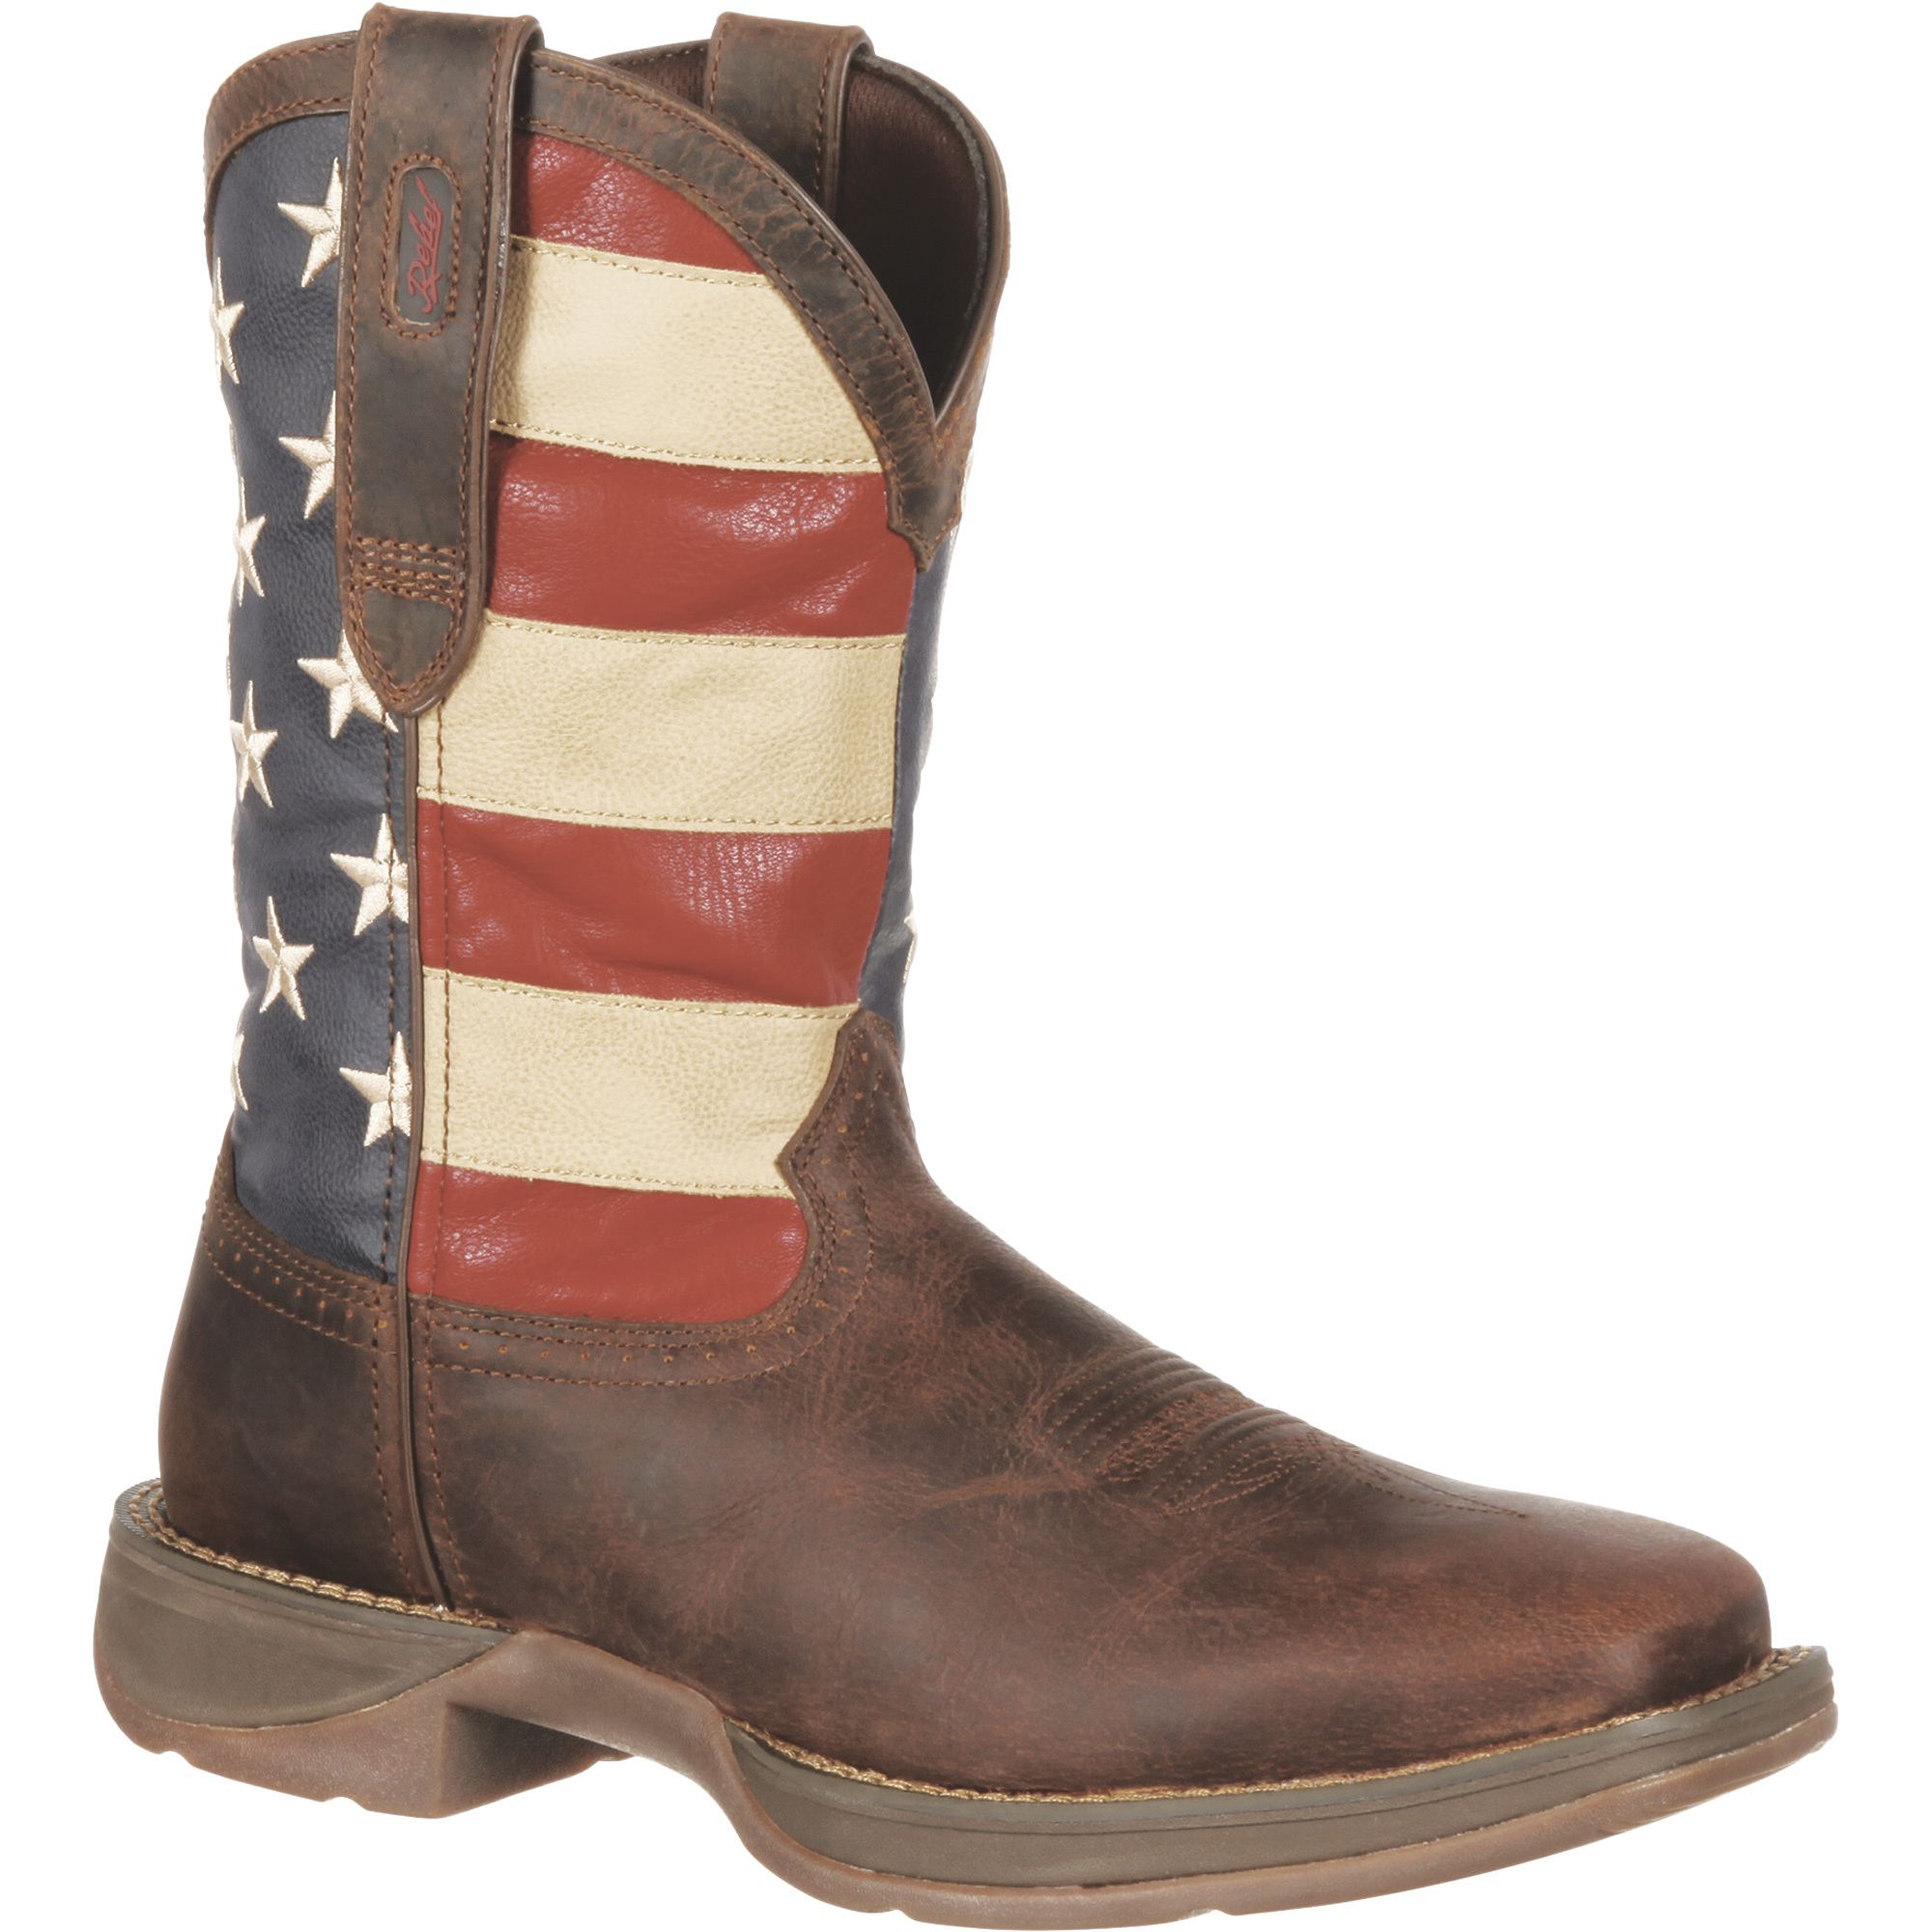 Durango Men's 11Inch American Flag Western Pull-On Work Boots - American Flag, Size 9 Wide, Model DB5554